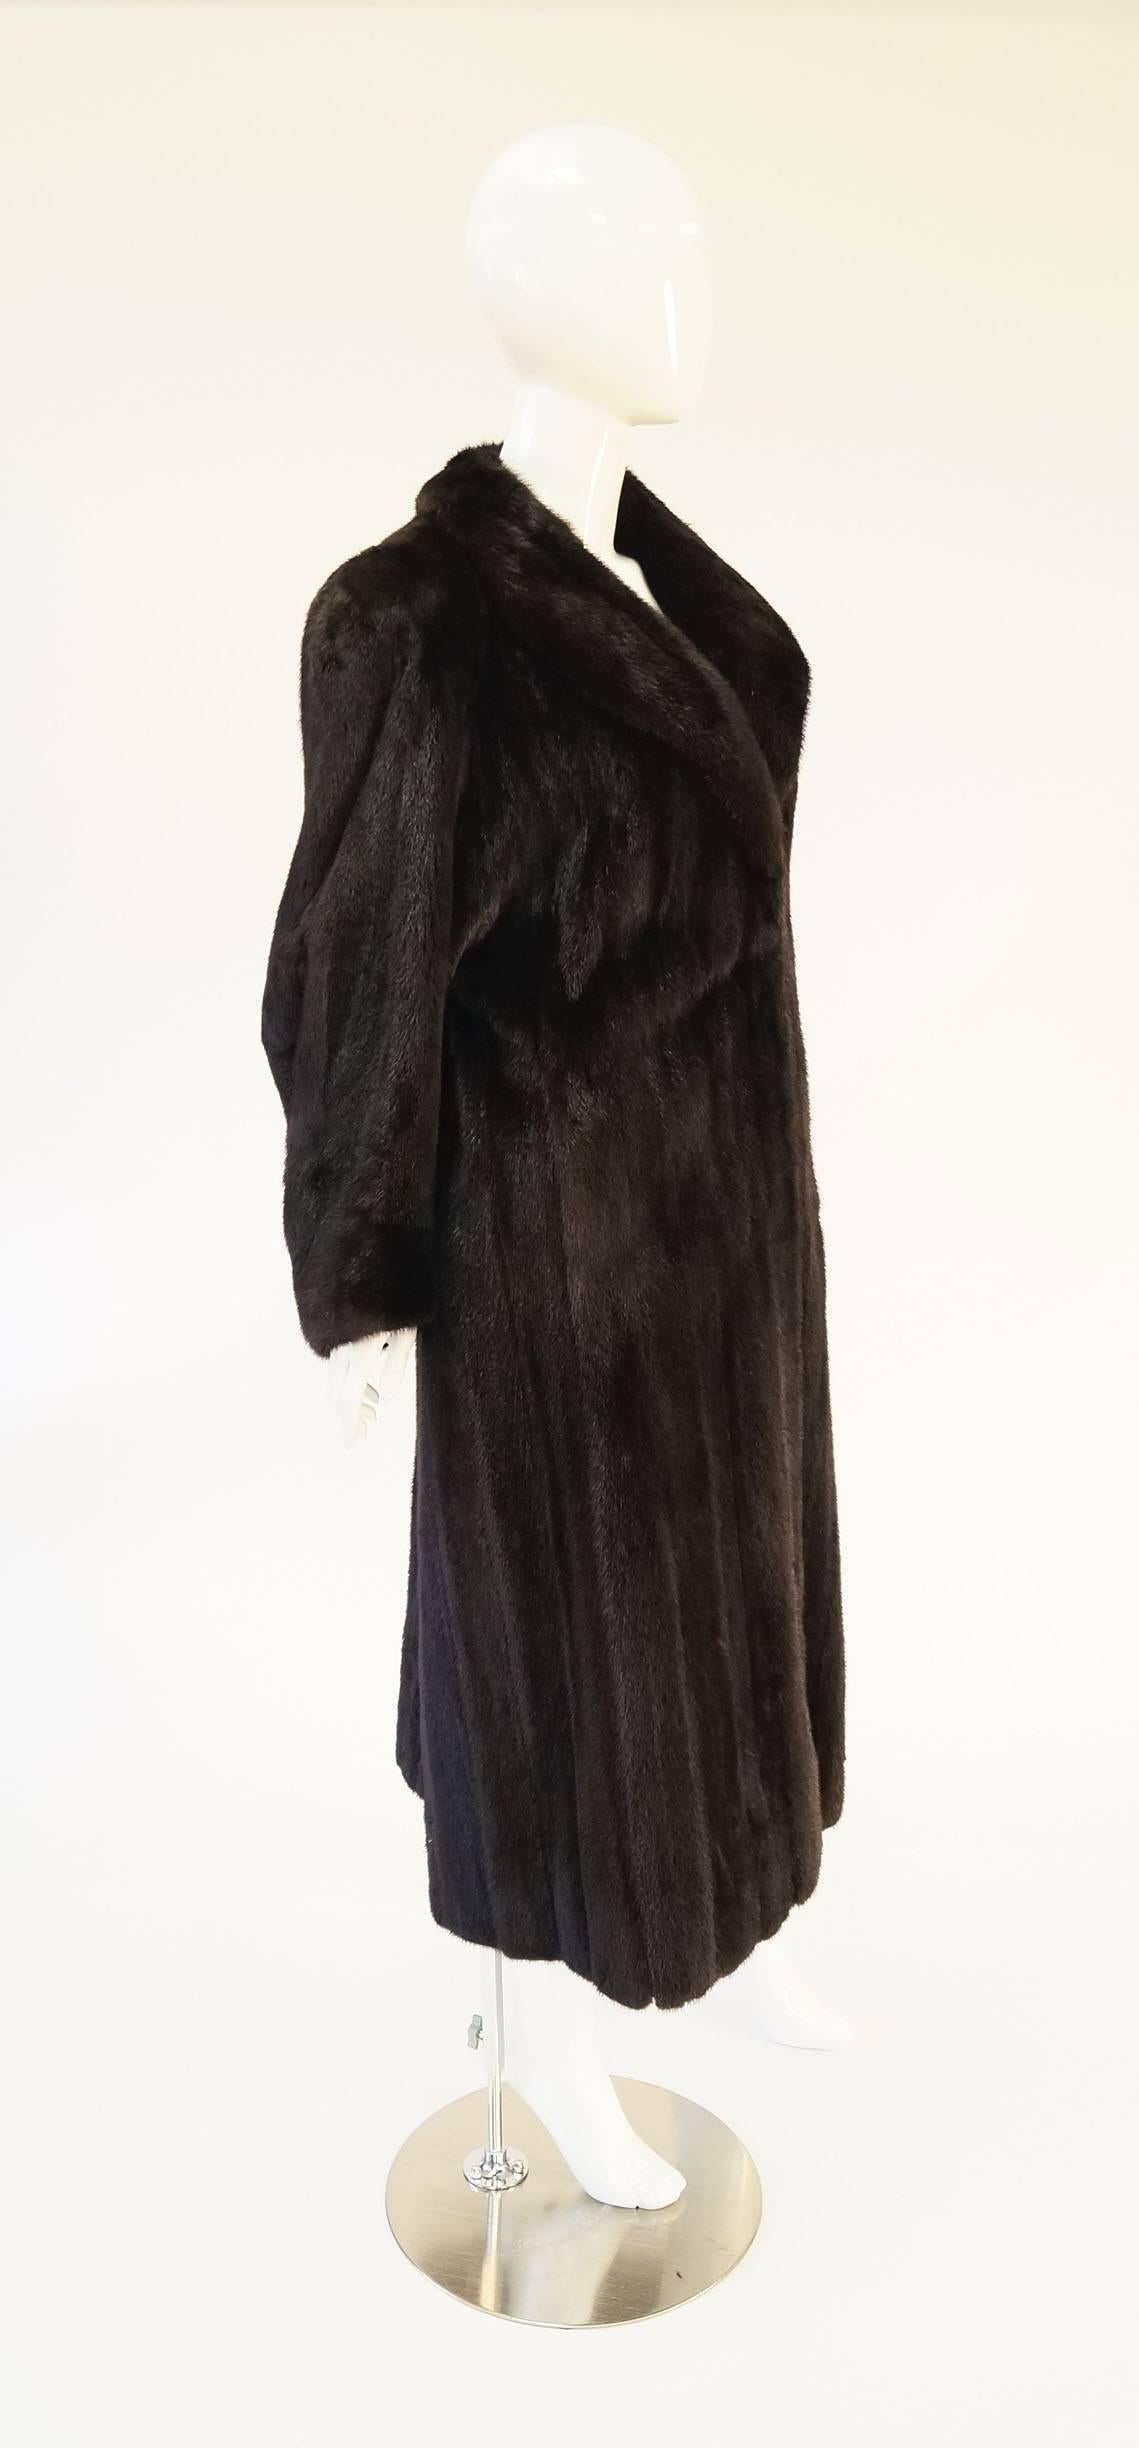 
This plush brown mink coat is absolutely stunning. The coat features a shawl collar that can be turned up to protect the wearer against the cold. Long, voluminous sleeves. Ankle length. The sumptuous dark mink and long length give the coat its